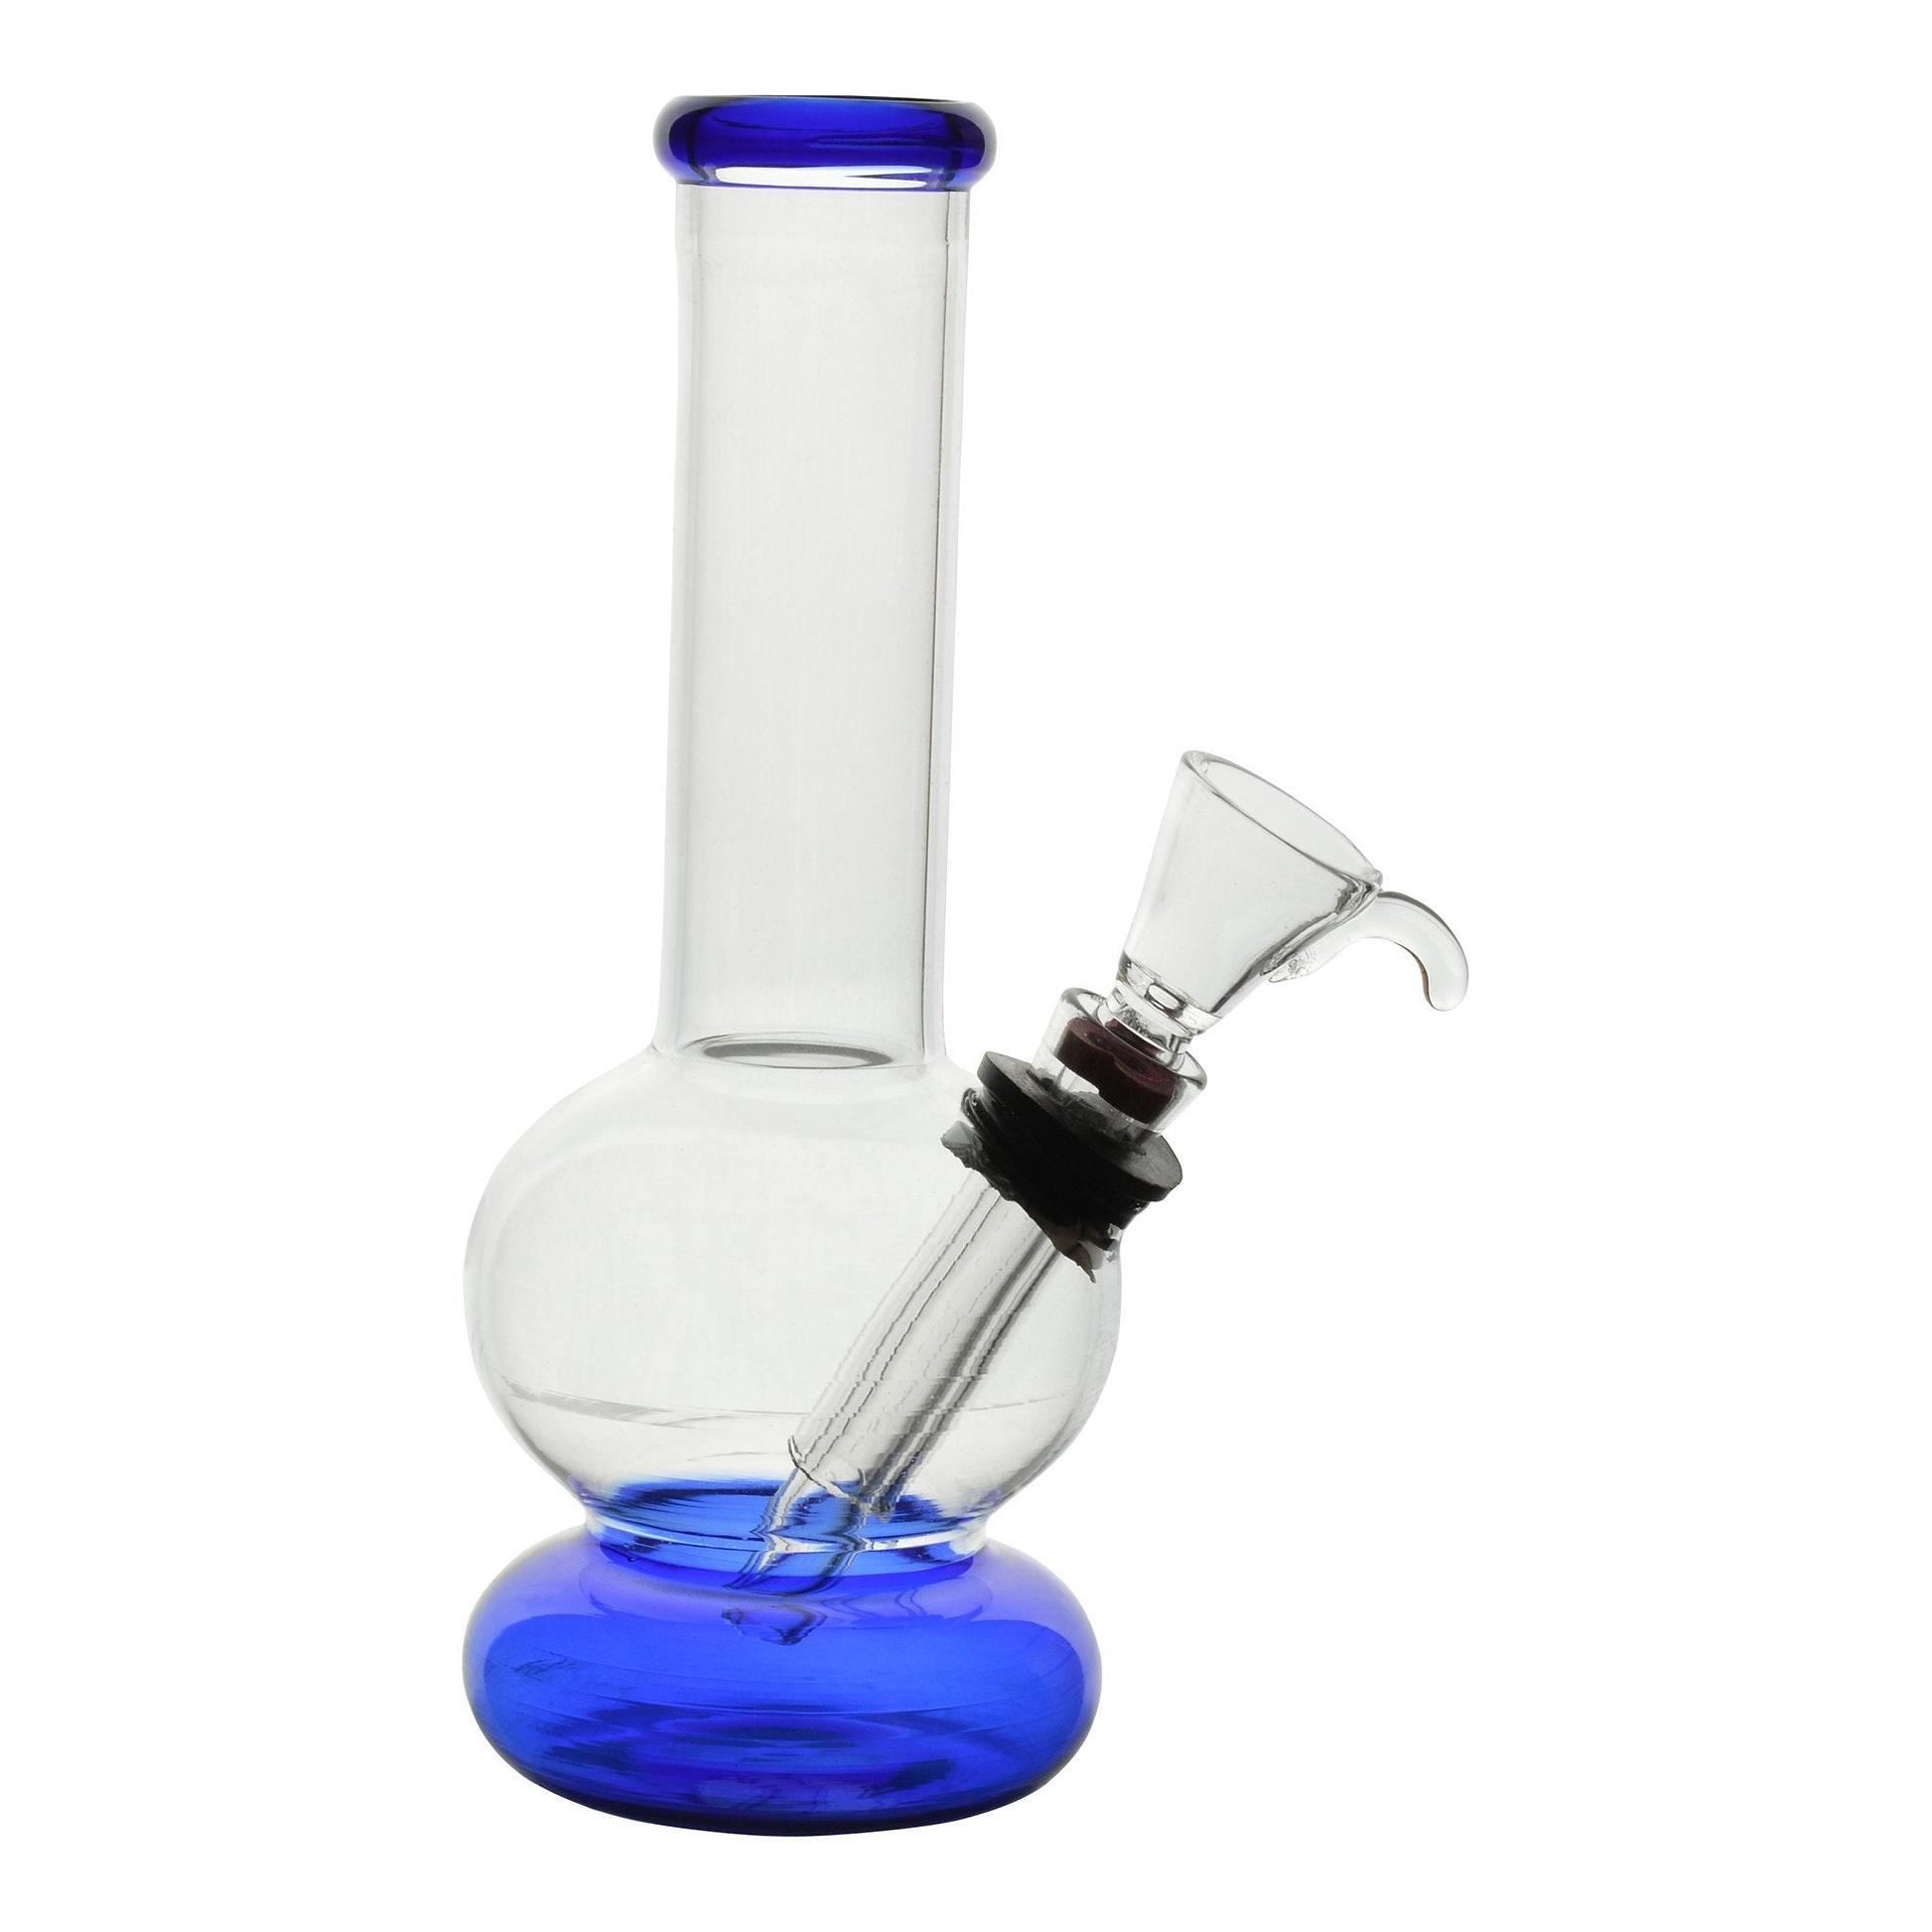 6 inch Mini thick bongs water pipes heady small bong oil rig